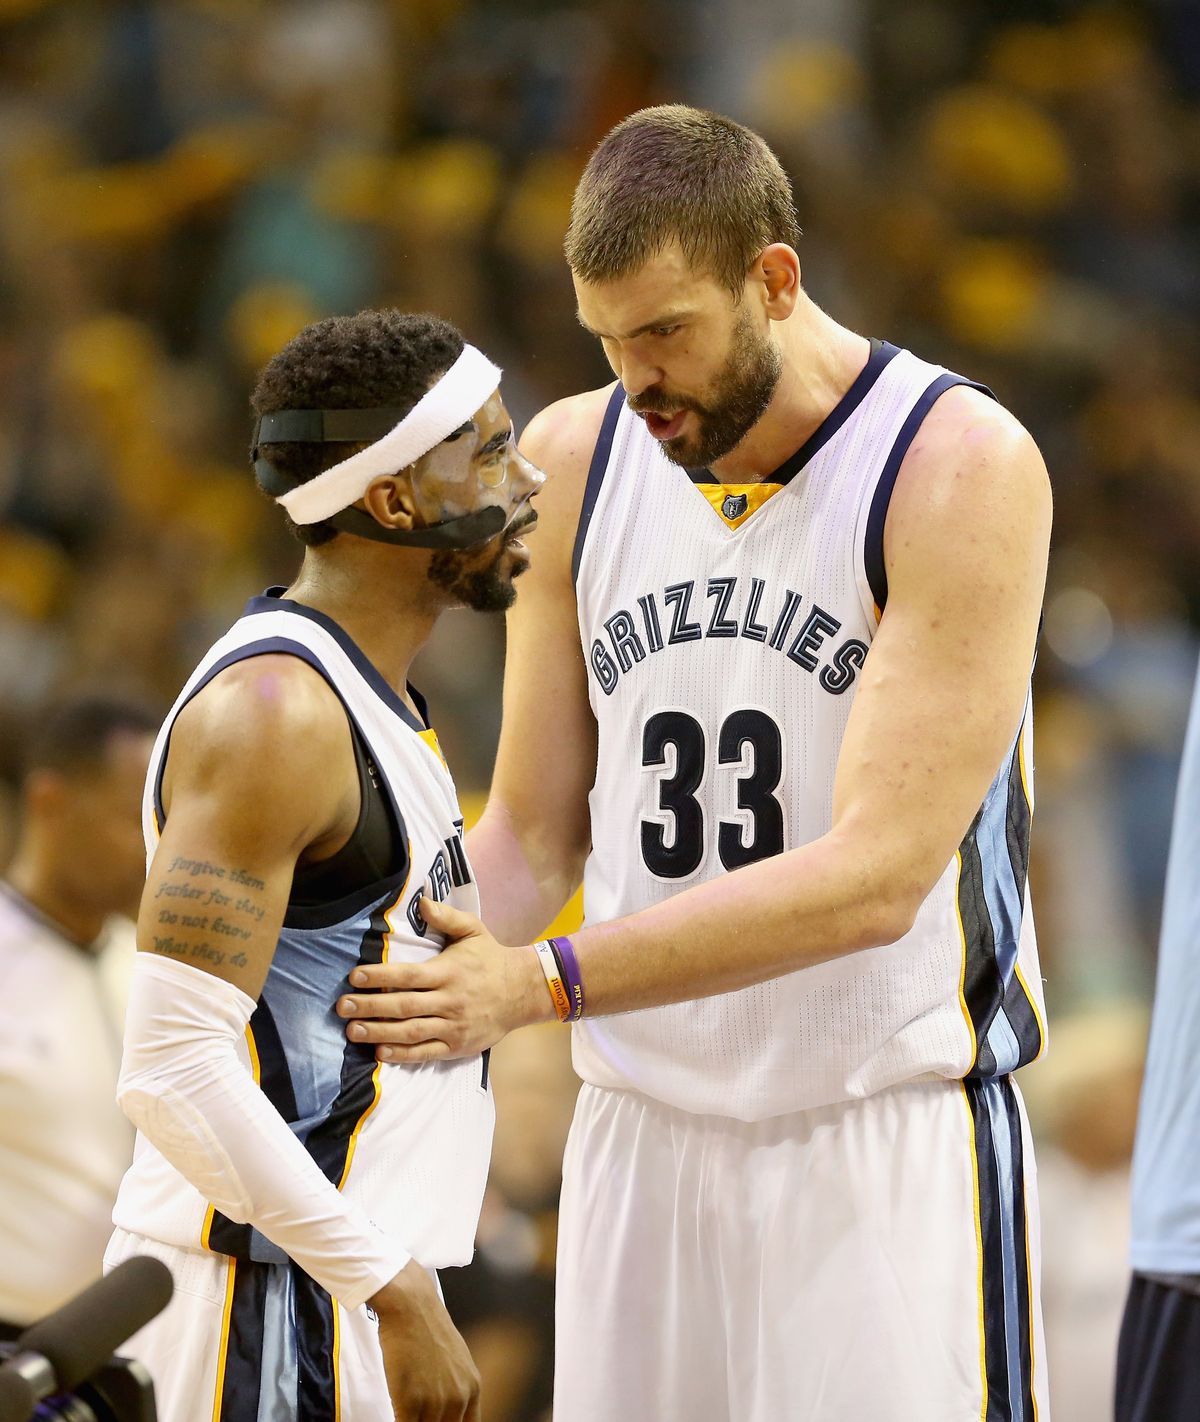 Golden State Warriors v Memphis Grizzlies - Game Three